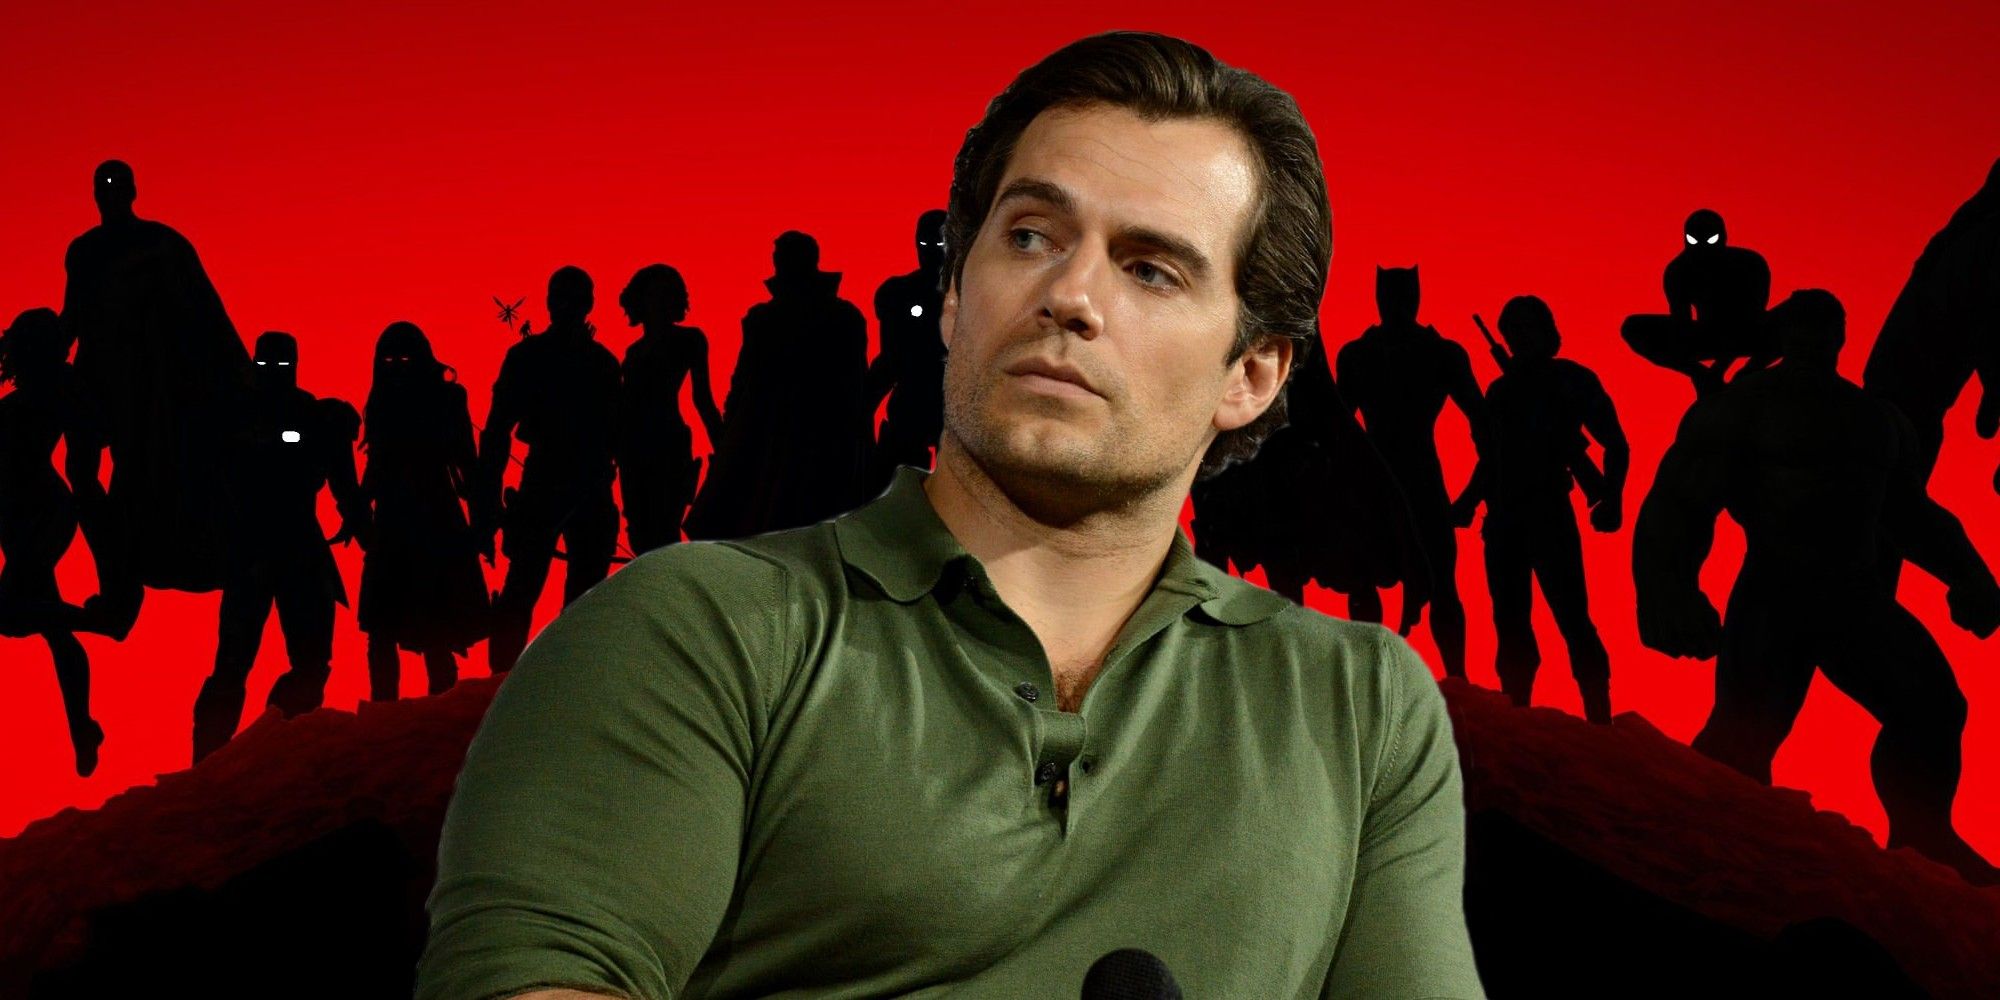 Captain Marvel 2' Rumored To Feature Henry Cavill As Wolverine